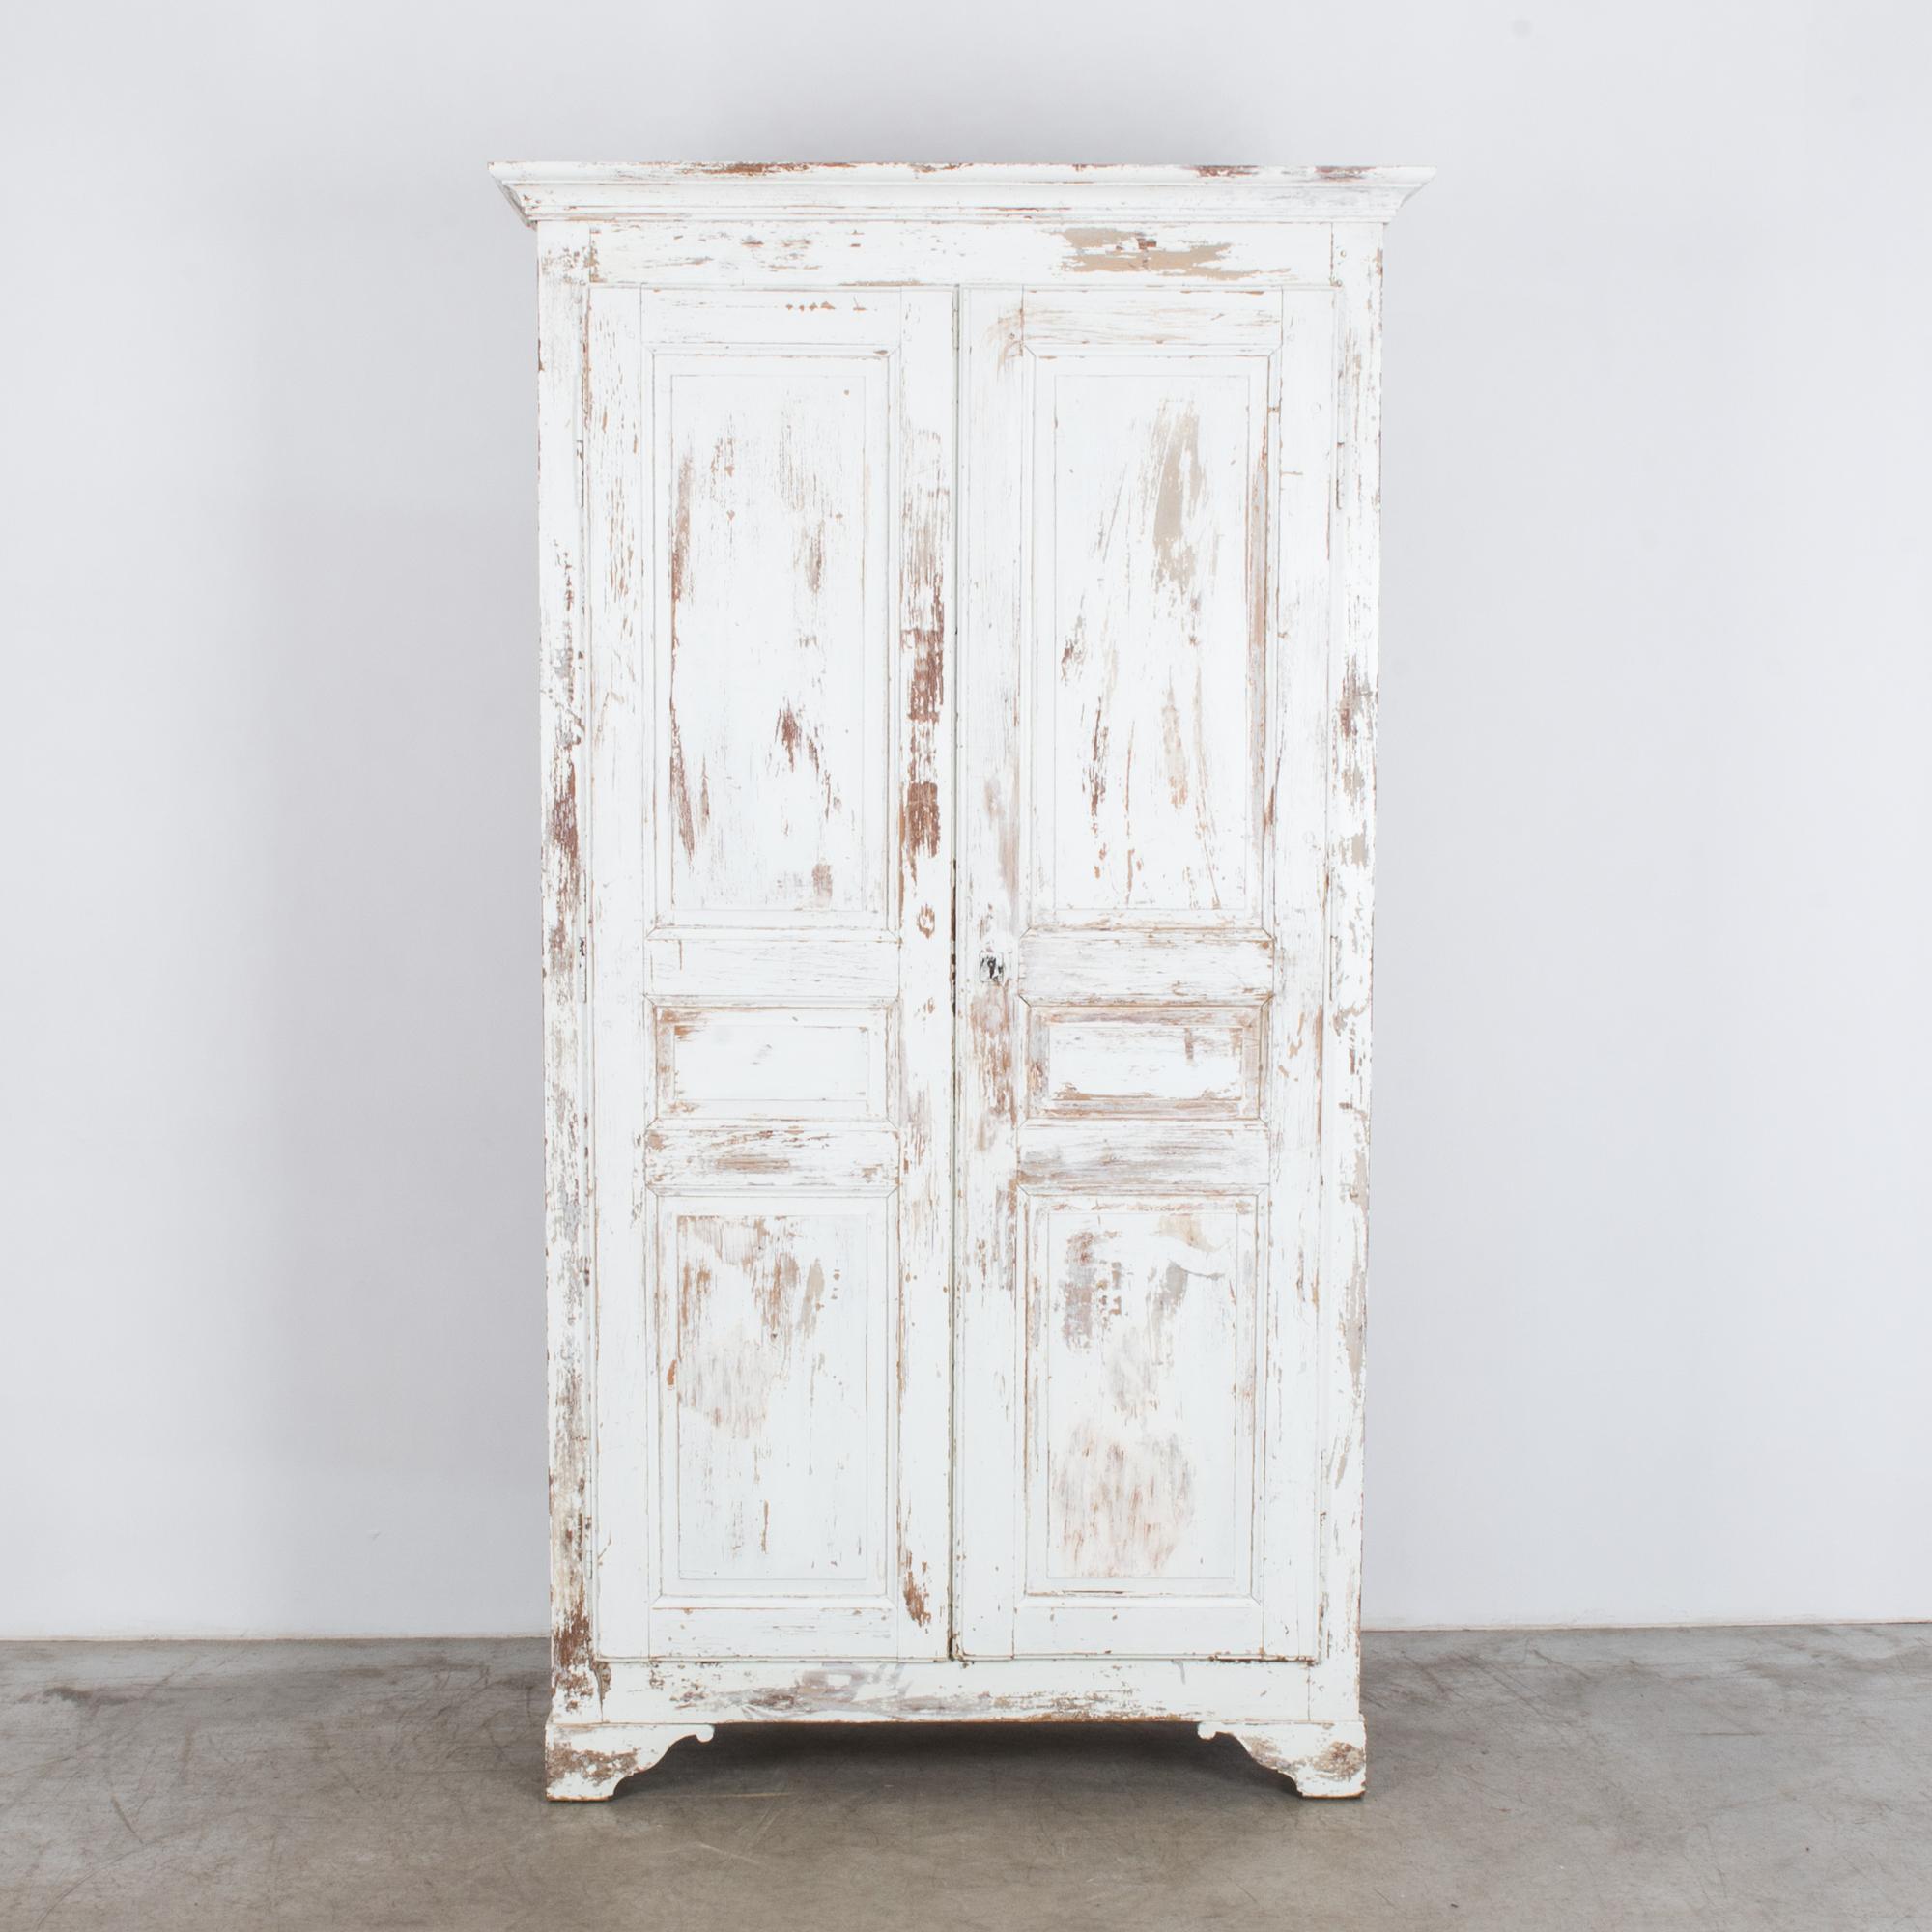 From turn of the century France, a spacious tall wardrobe with a textural white patina. Cleaned and refreshed in our atelier, this piece retains the original white paint, restored and stabilized to a time touched white tone, revealing an earlier